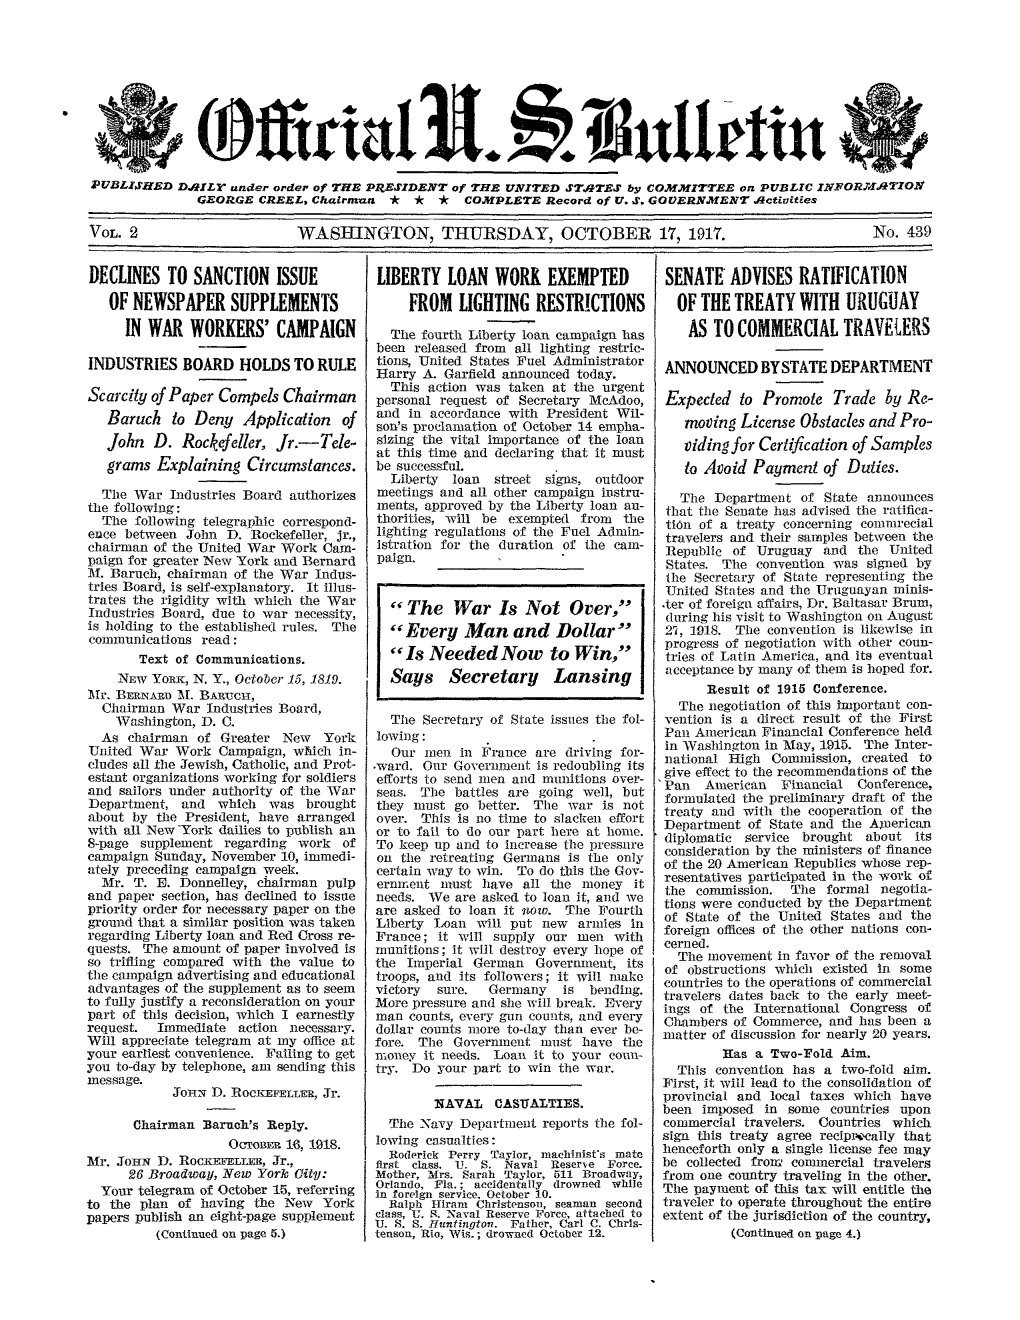 Declines to Sanction Issue of Newspaper Supplements in War Workers' Campaign Liberty Loan Work Exempted from Lighting Restrictio